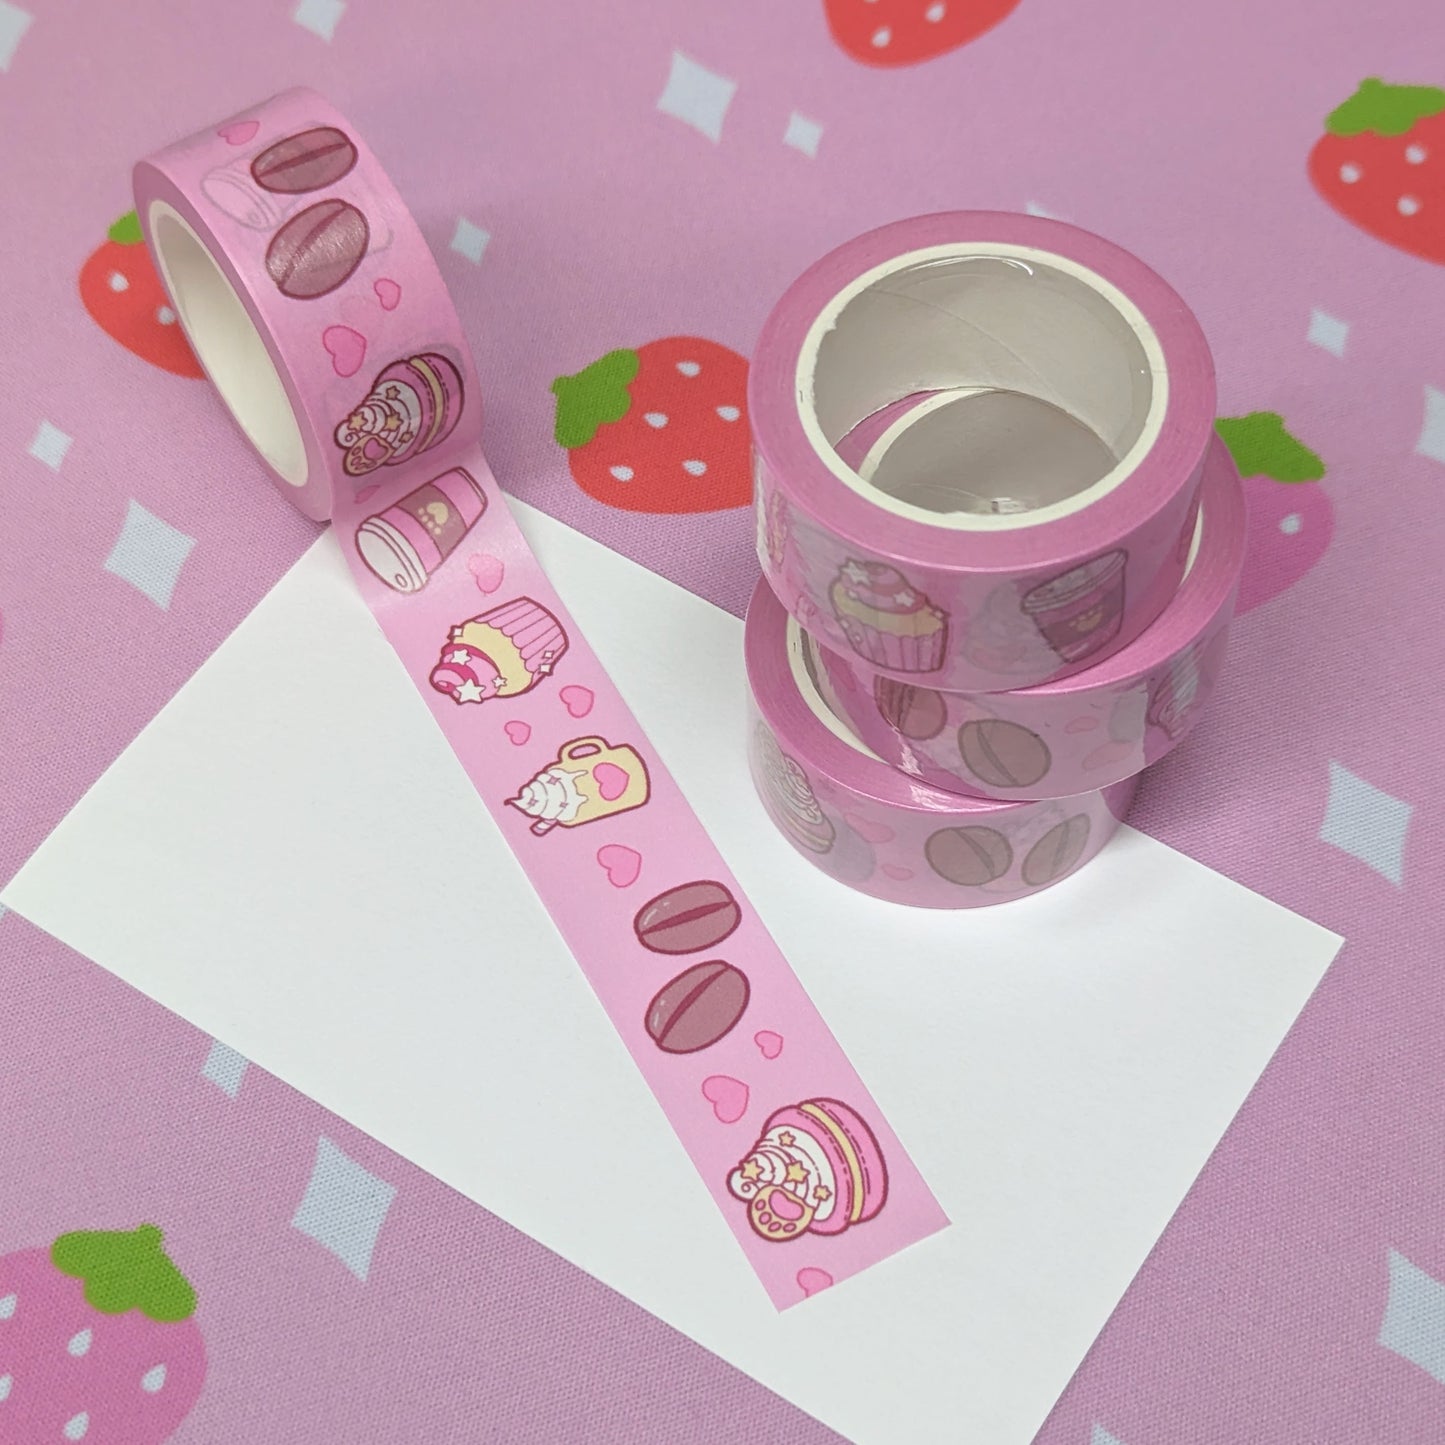 Cafe Coffee Bakery Pink Washi Tape